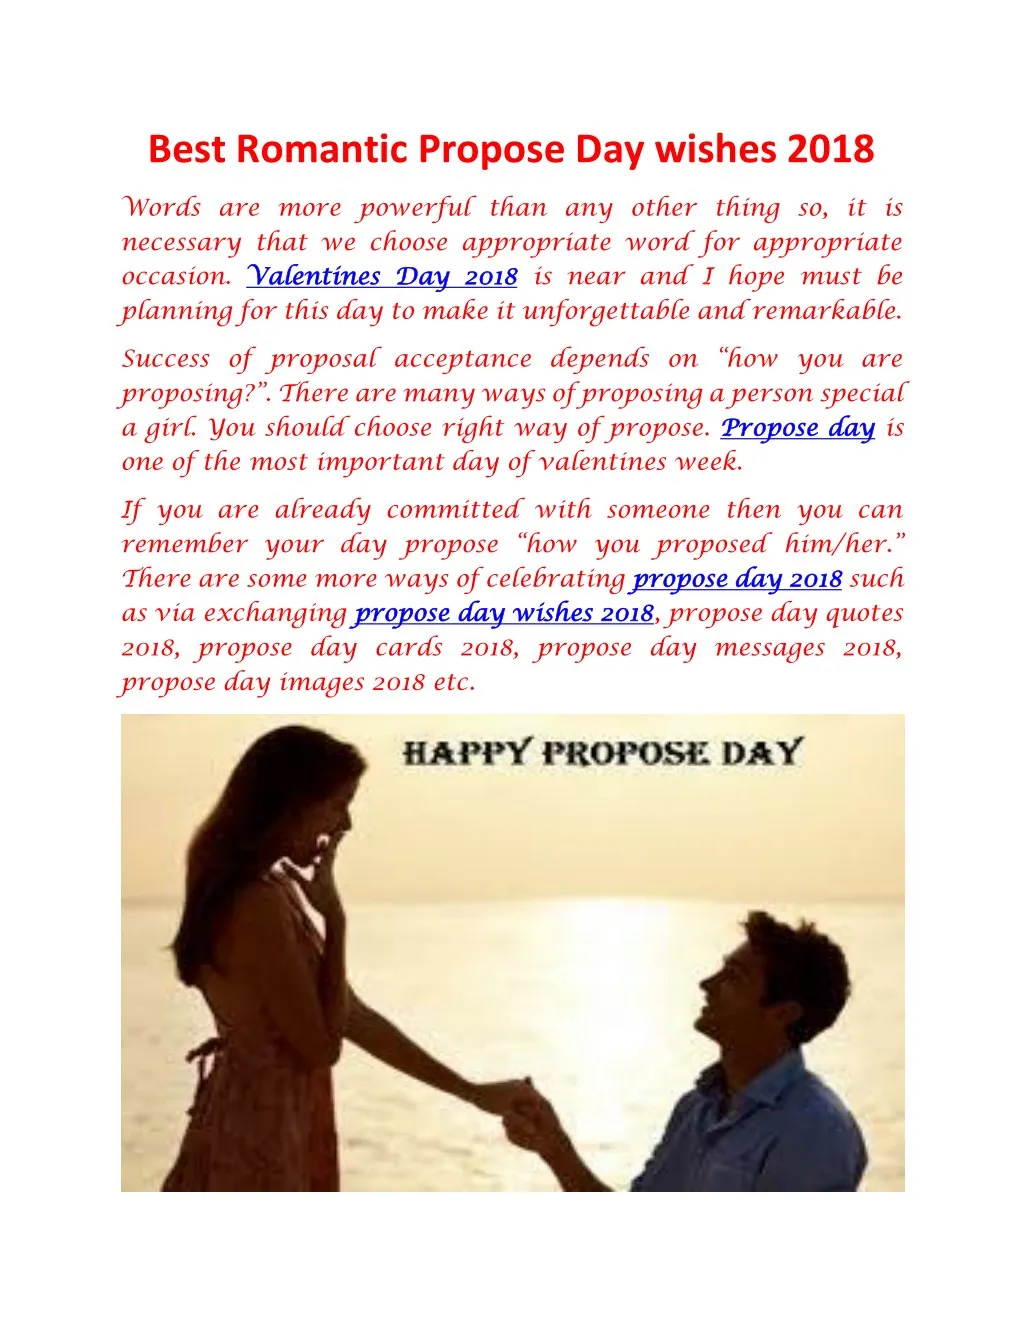 best romantic propose day wishes 2018